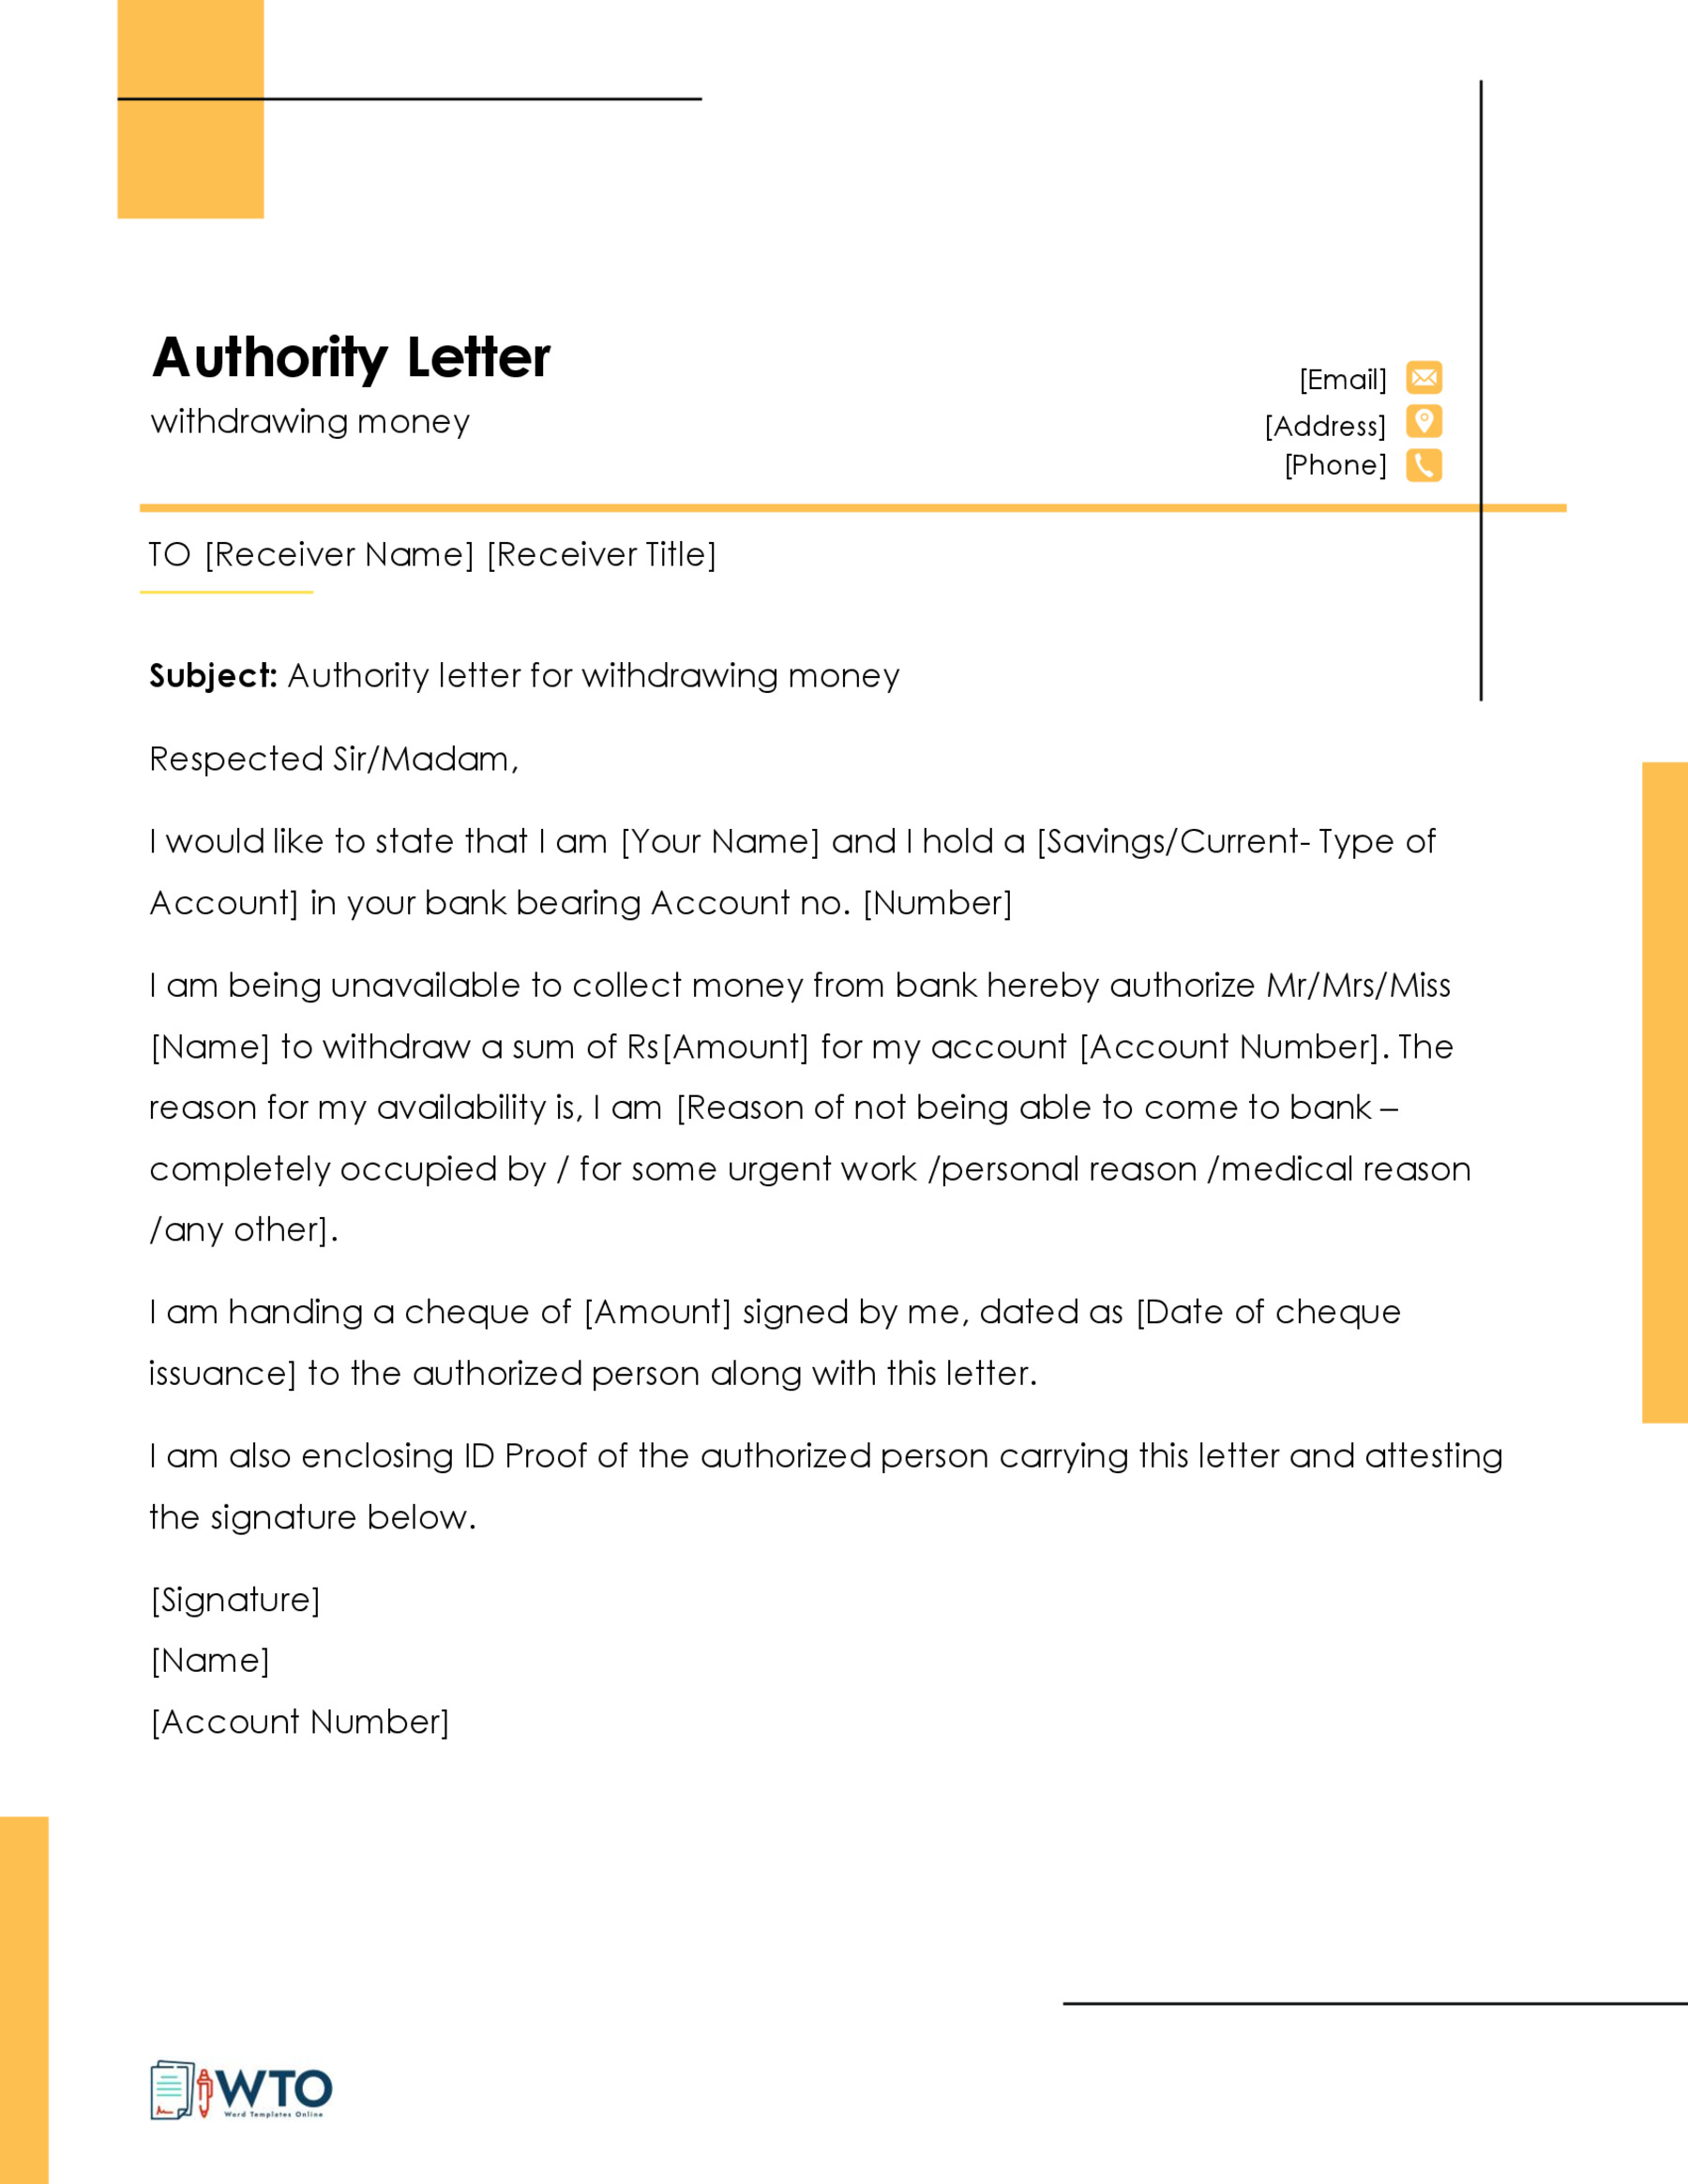 Editable Authorization Letter Sample to Withdraw Money in Bank